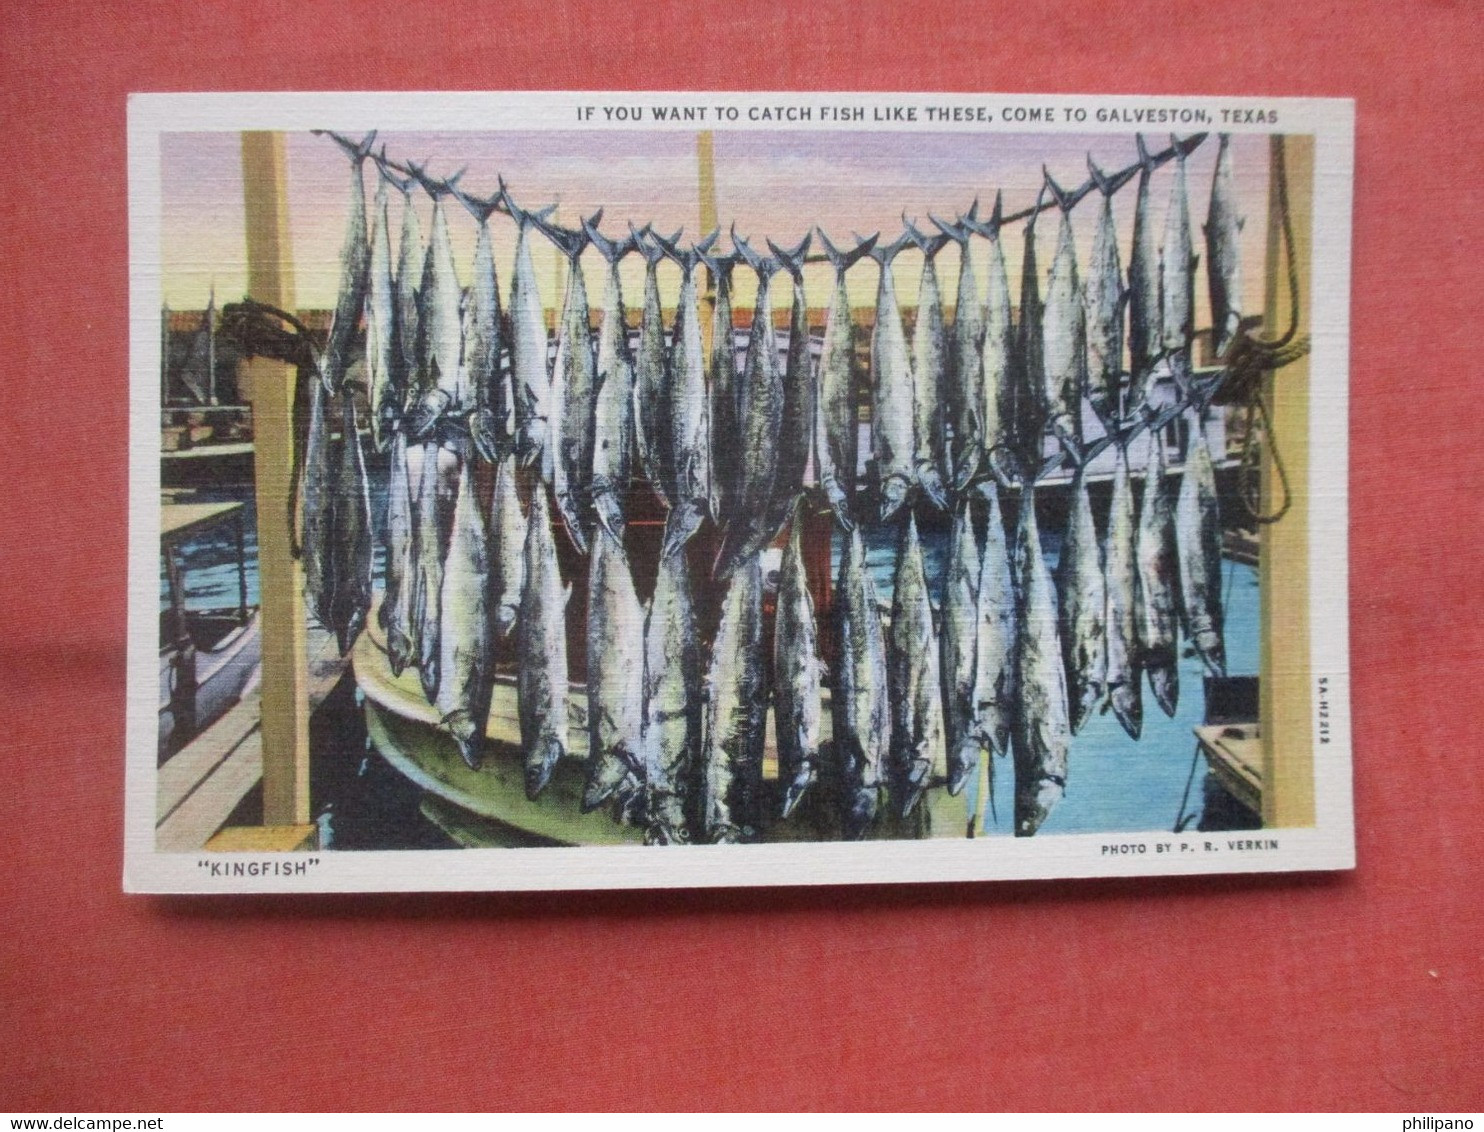 Kingfish.  If You Want To Catch Fisk Like These Come To  Galveston  Texas   Ref 5367 - Galveston